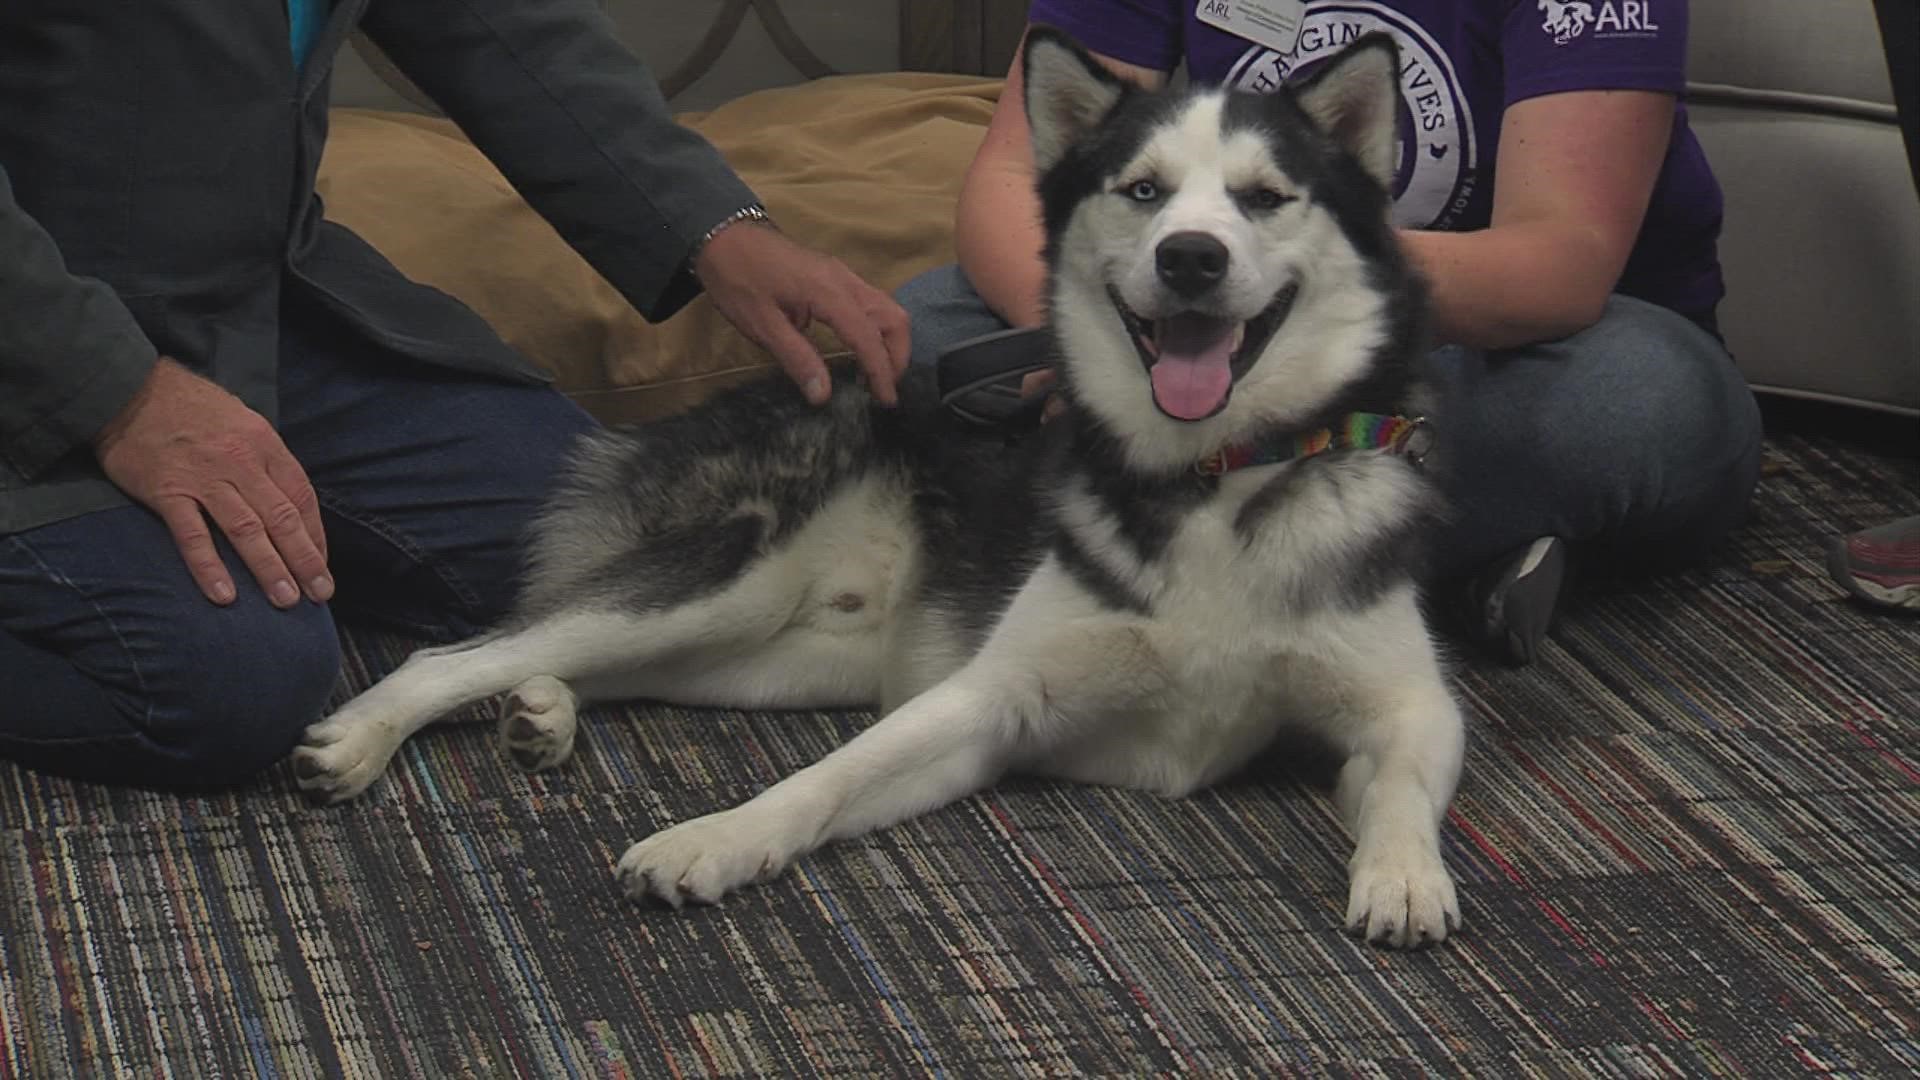 "Veleak" is a one-year old Siberian Husky that is NOW AVAILABLE at Animal Rescue League of Iowa main office during "Fall in Love" Weekend-Name your price adoptions!